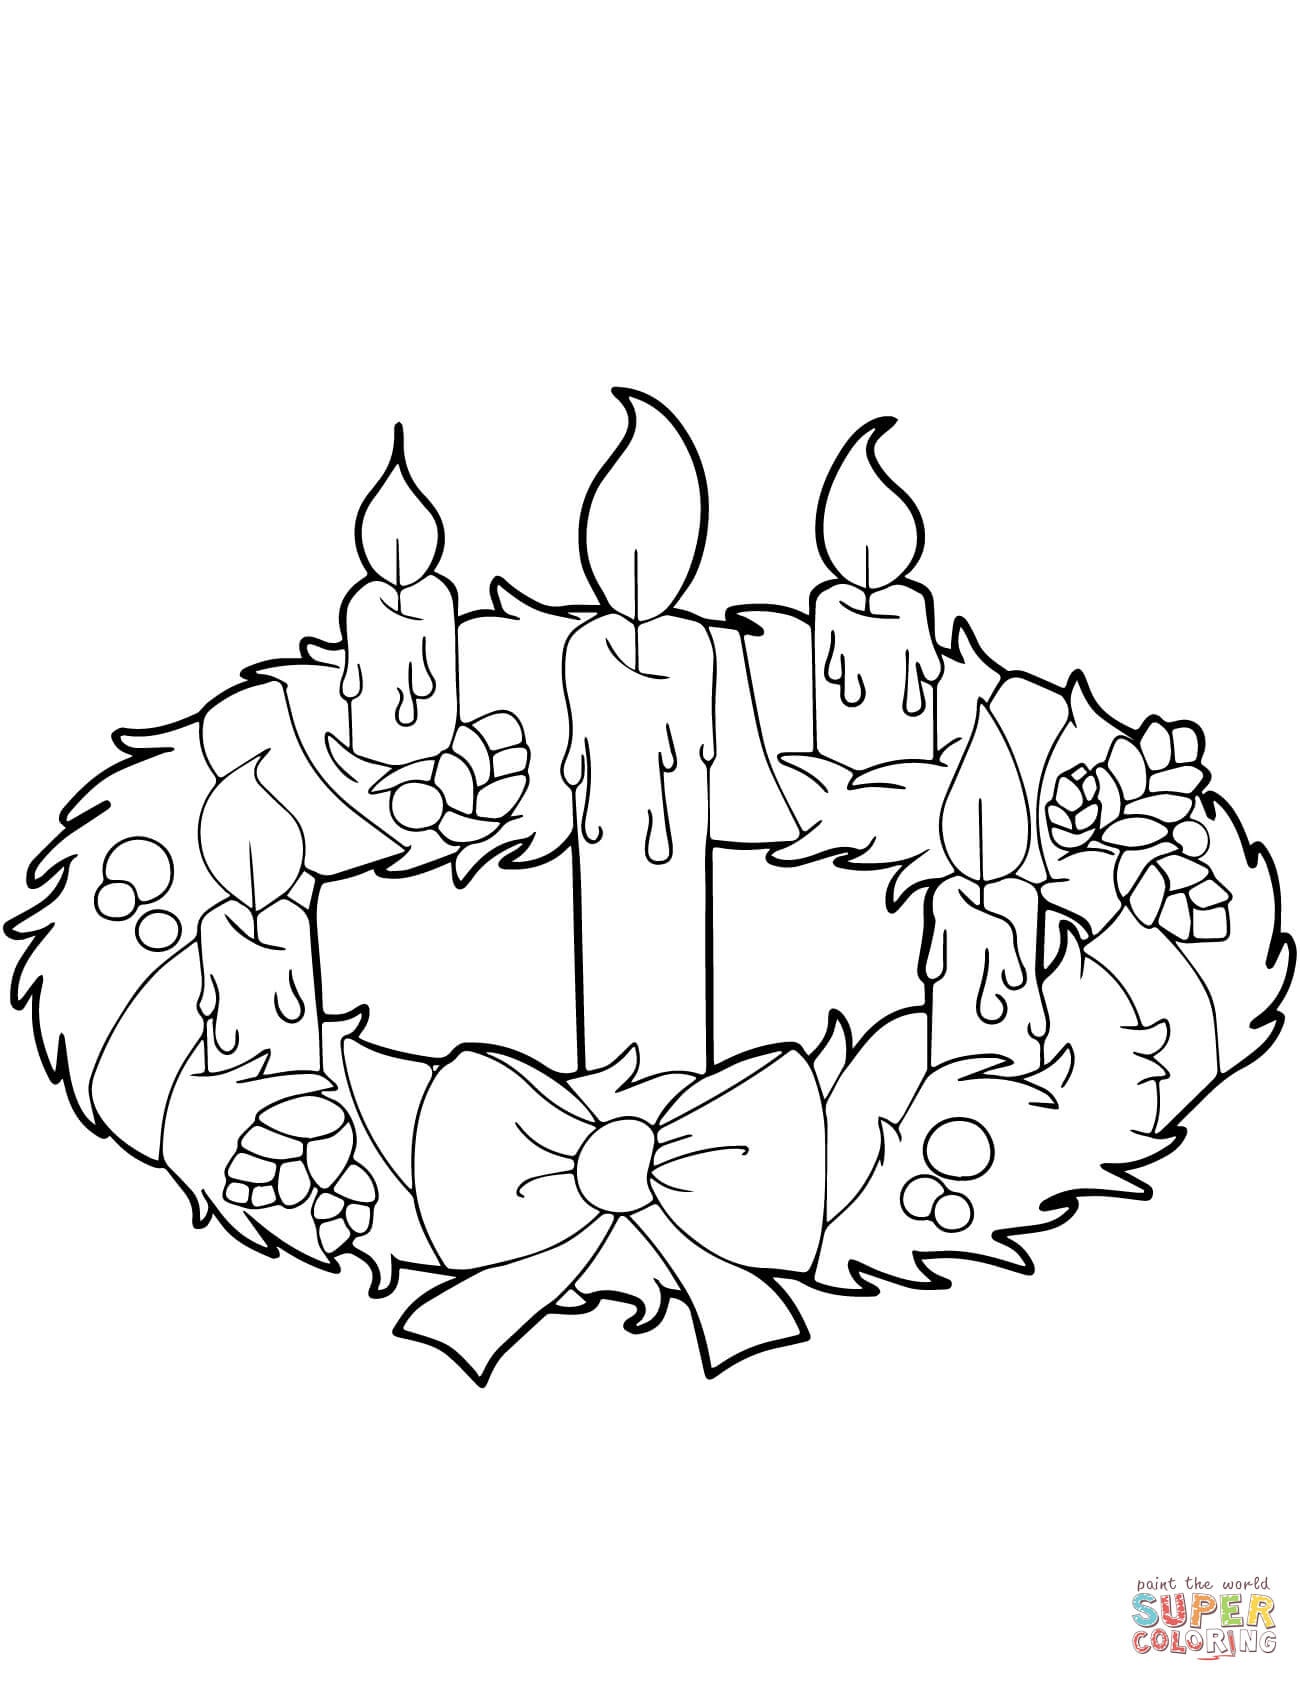 Advent Wreath And Candles Coloring Page | Free Printable Coloring Pages - Free Printable Advent Wreath